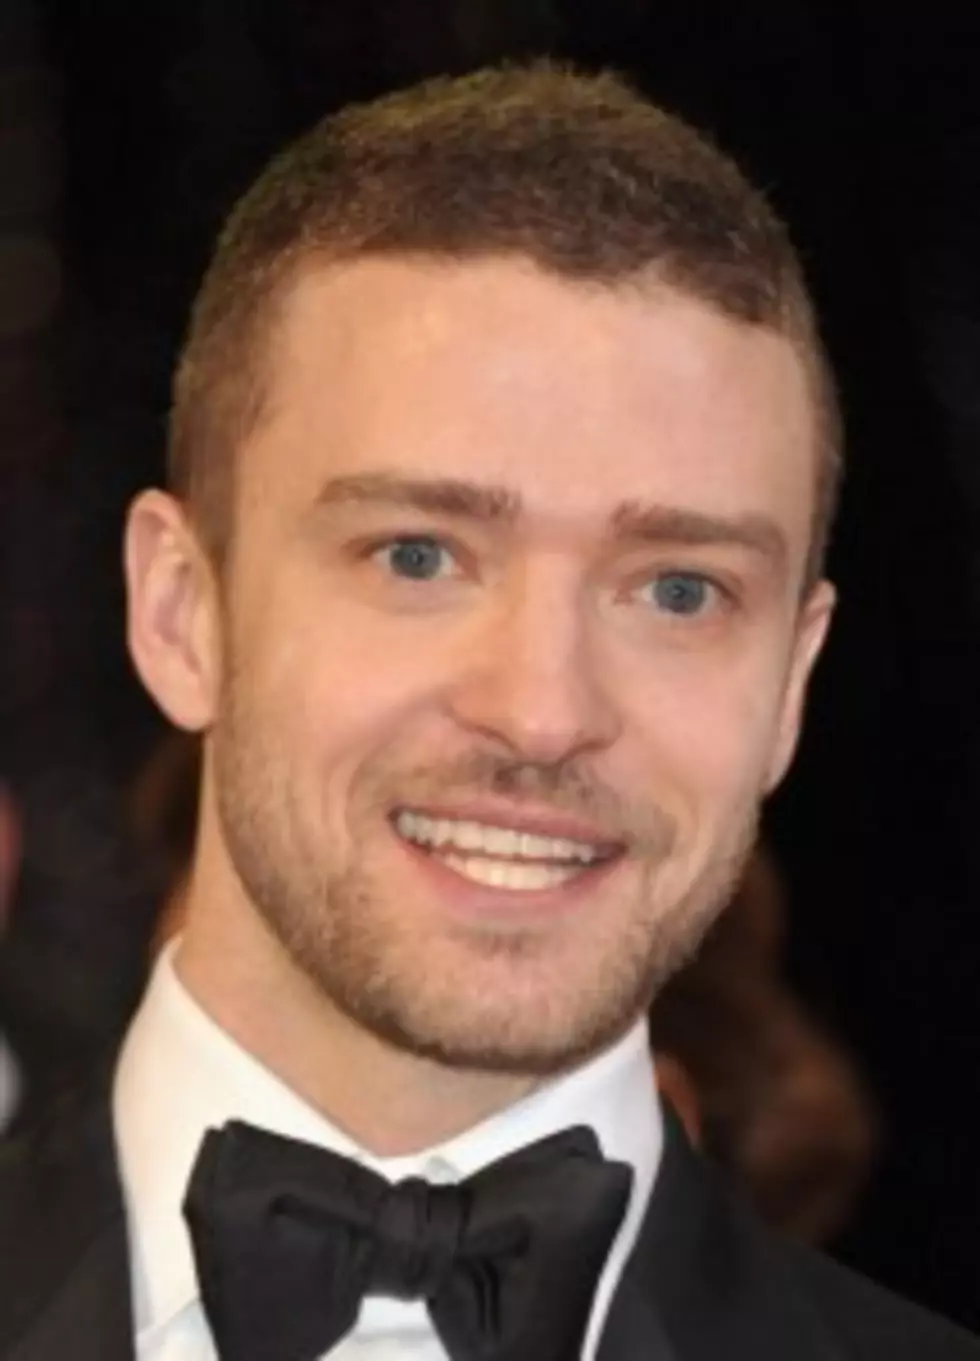 Justin Timberlake is a Pothead? Claims he Smokes in Interview.